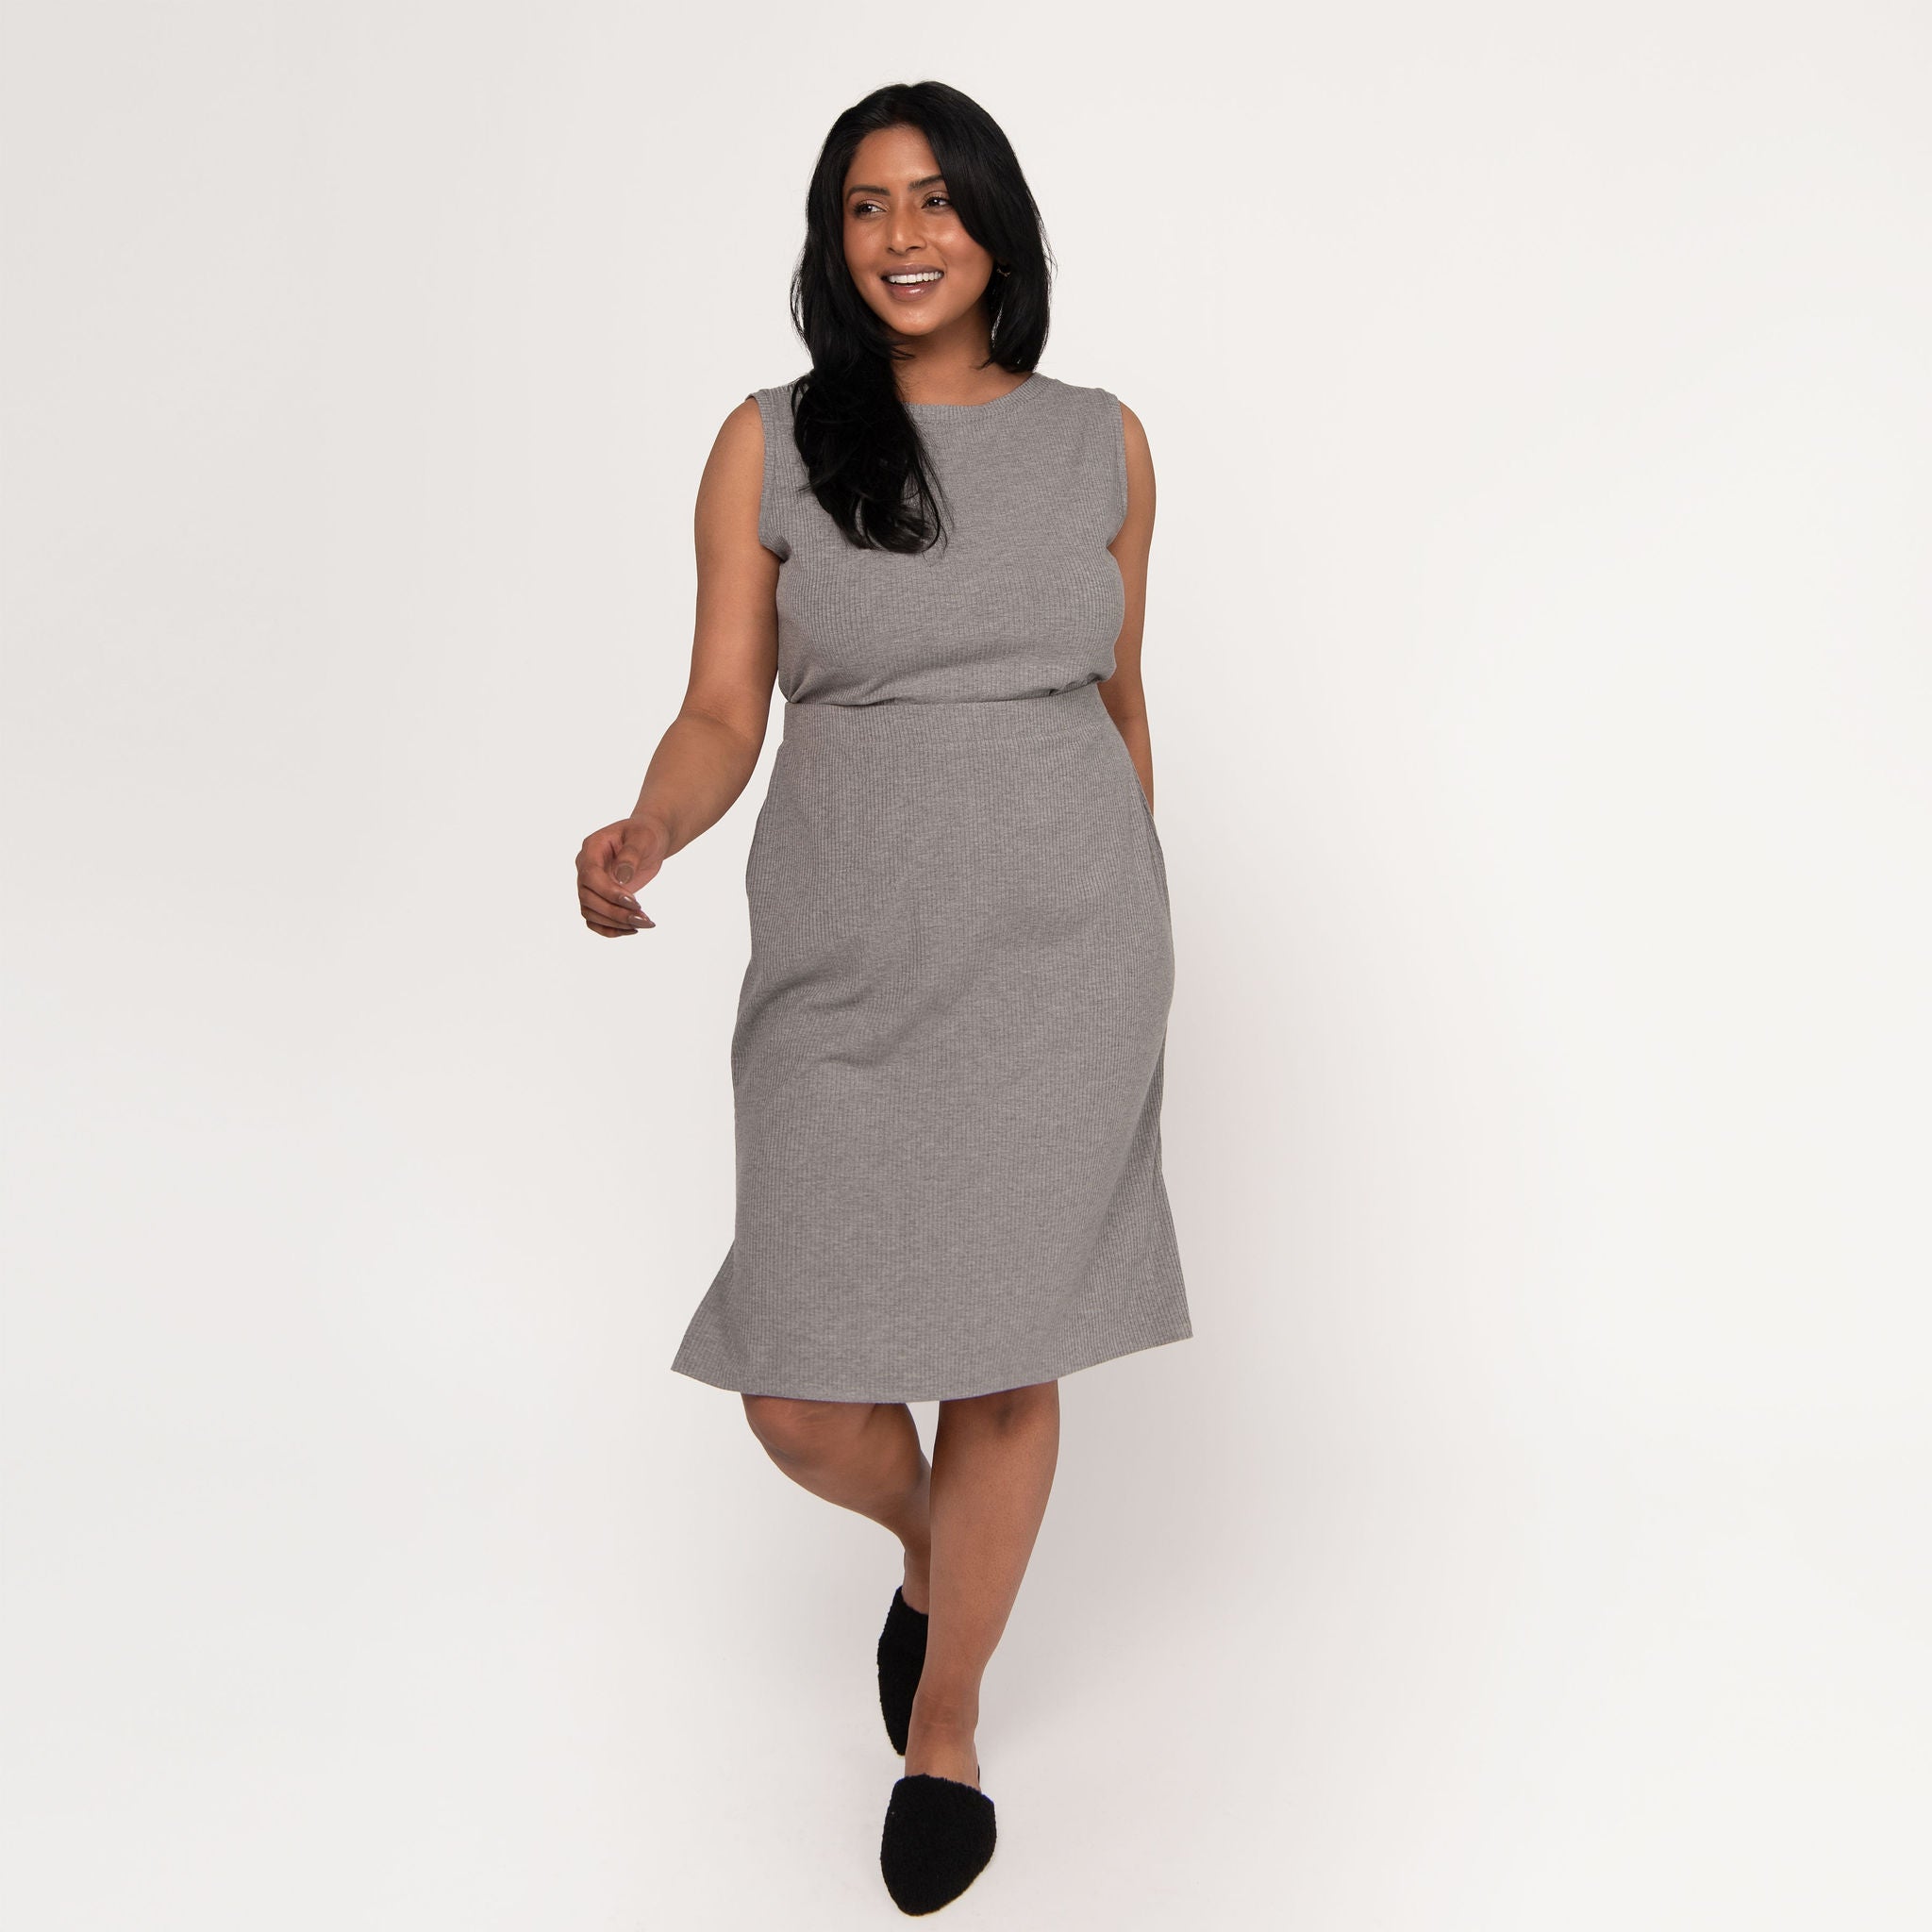  Woman wearing grey body-skimming fit stretchy mid calf length vertical ribbed skirt with tucked in grey sleeveless shirt